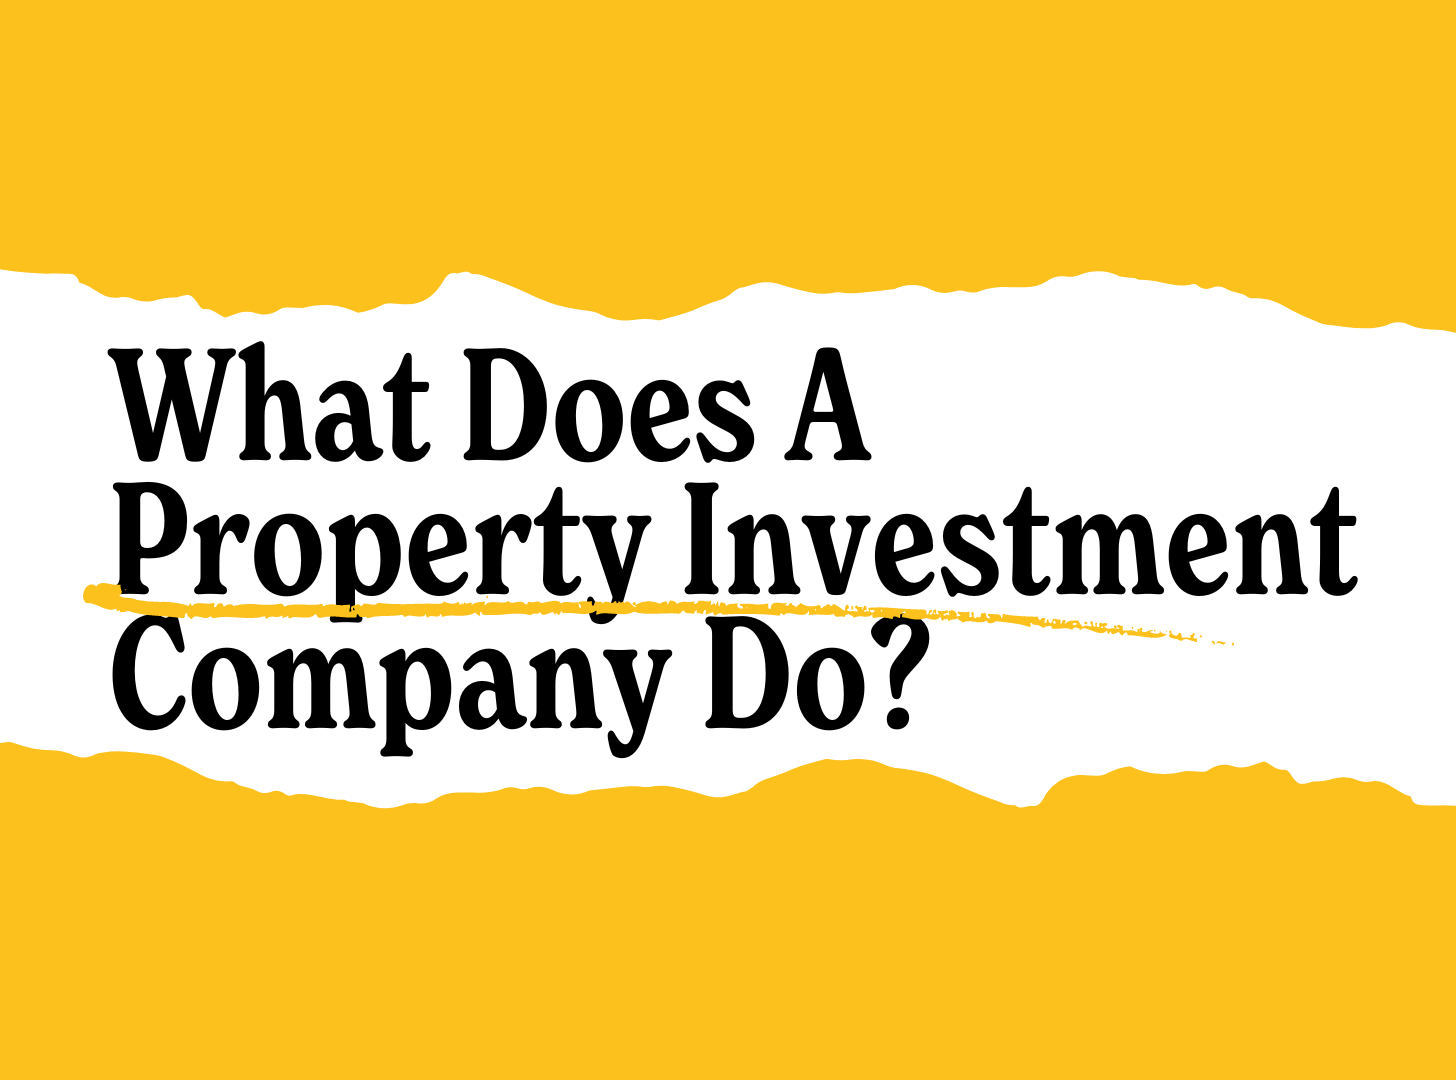 What Does A Property Investment Company Do?